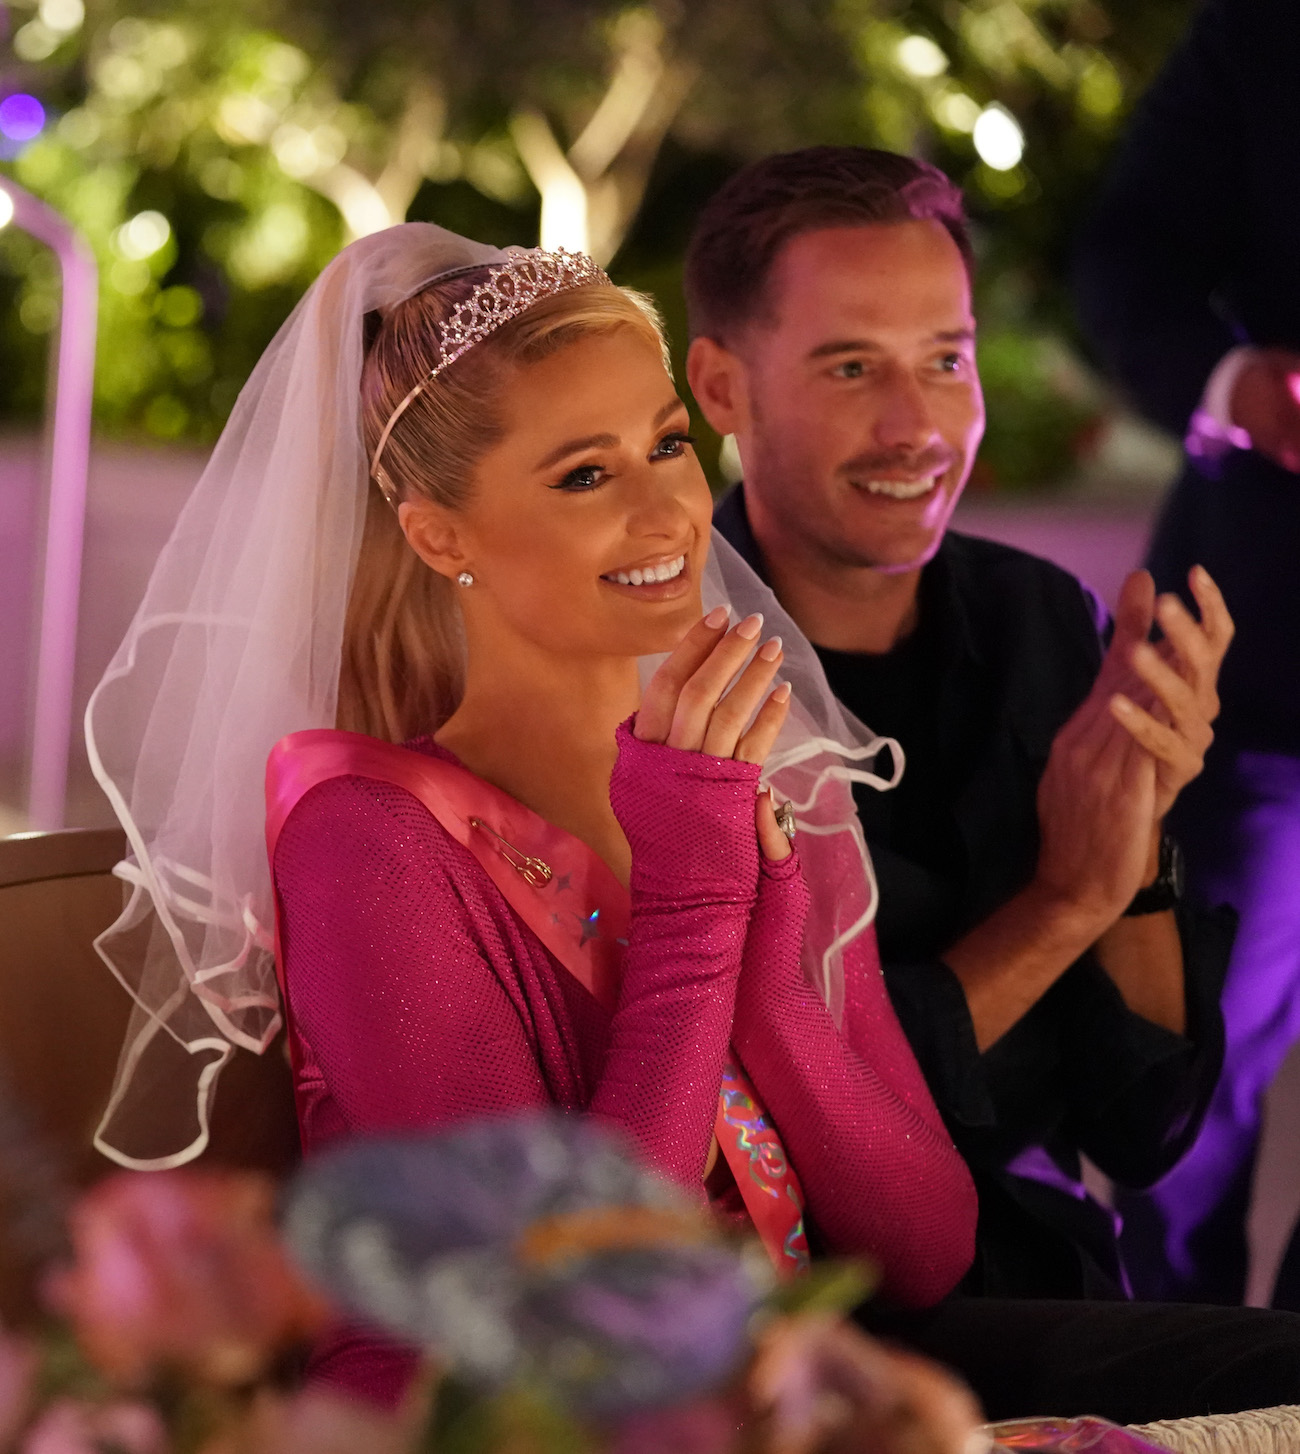 Paris Hilton wears a pink dress and veil as she smiles while sitting next to Carter Reum